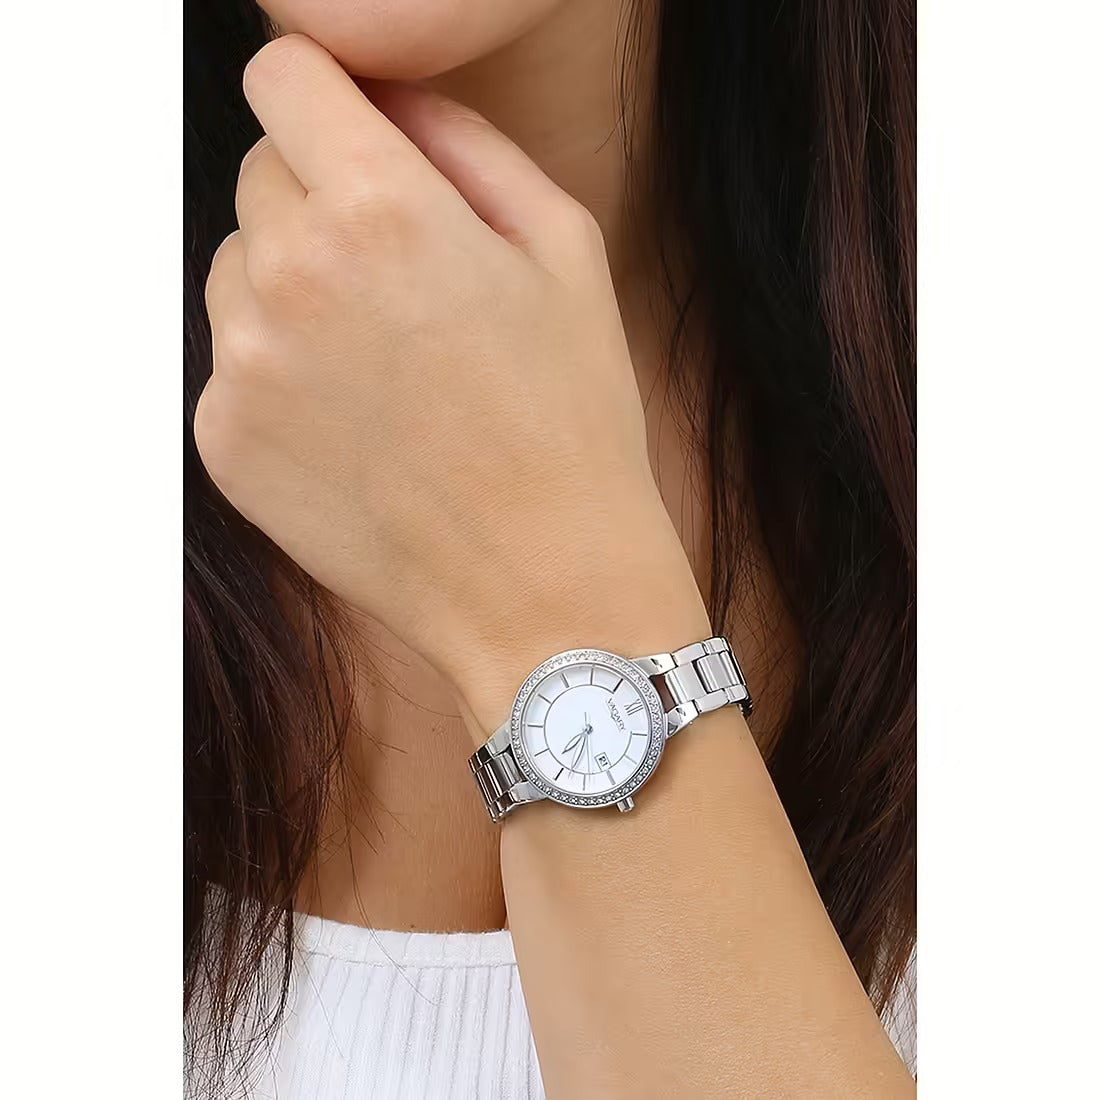 Vagary by Citizen - Collezione Flair
Flair Lady, 30mm - IU3-312-11